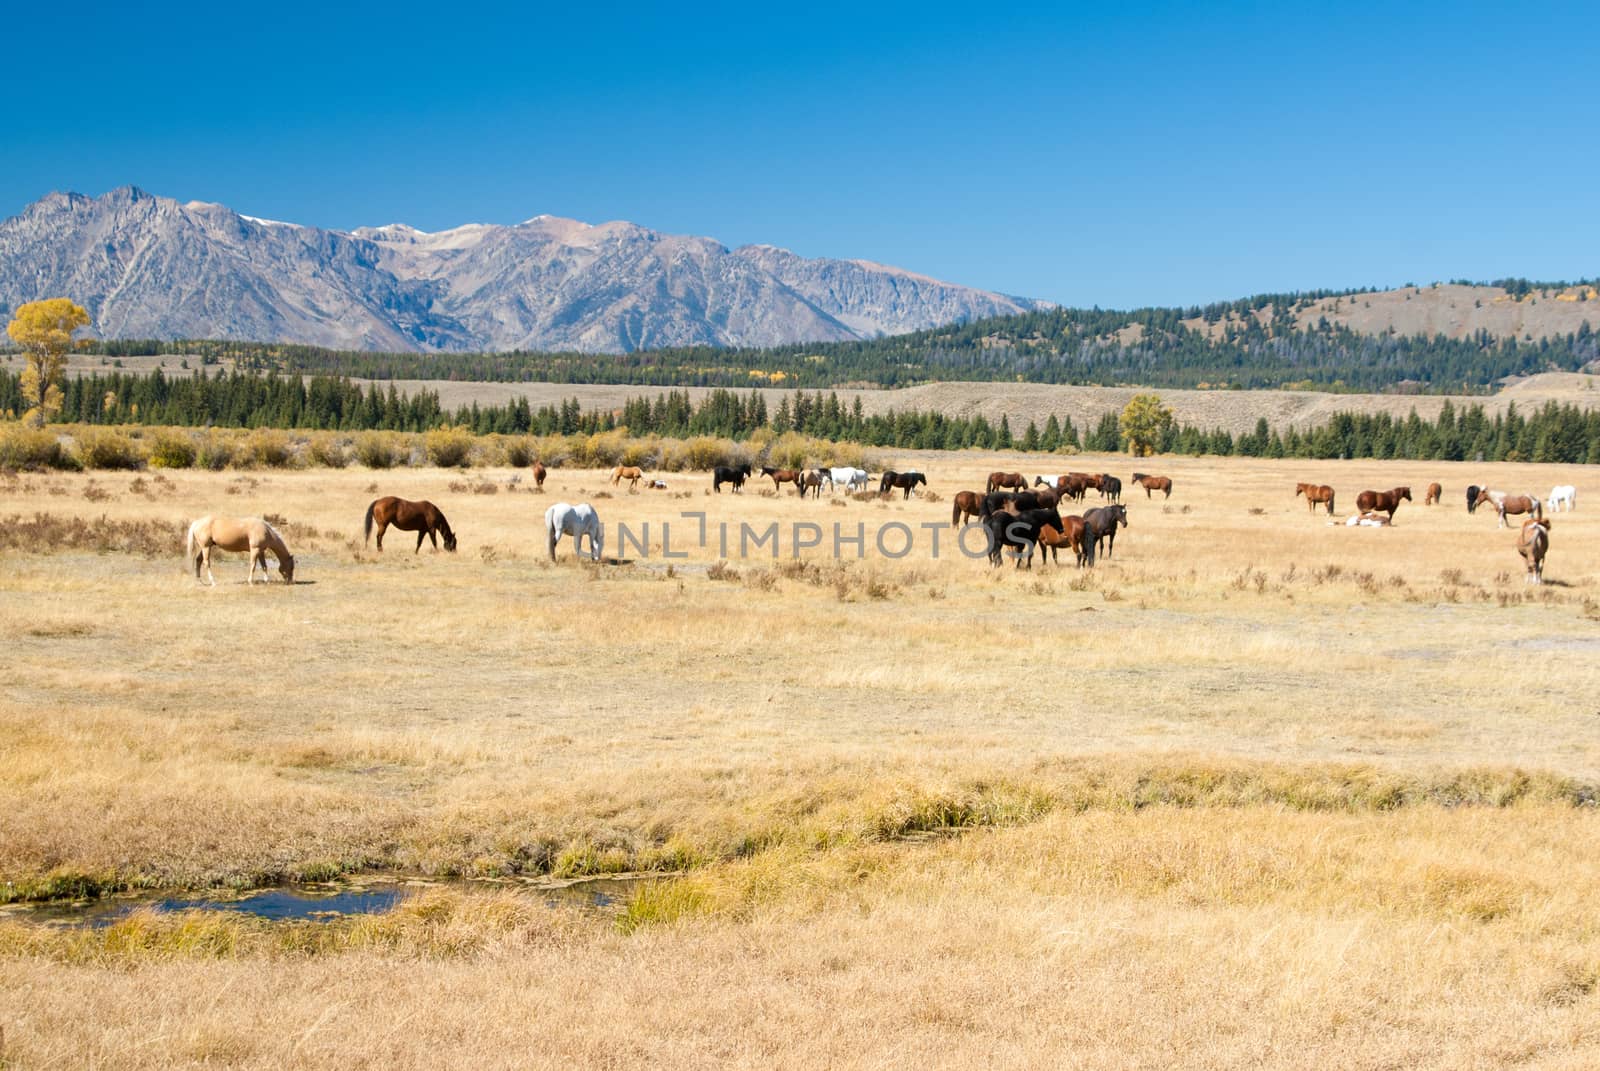 Herd of horses in Wyoming mountain country